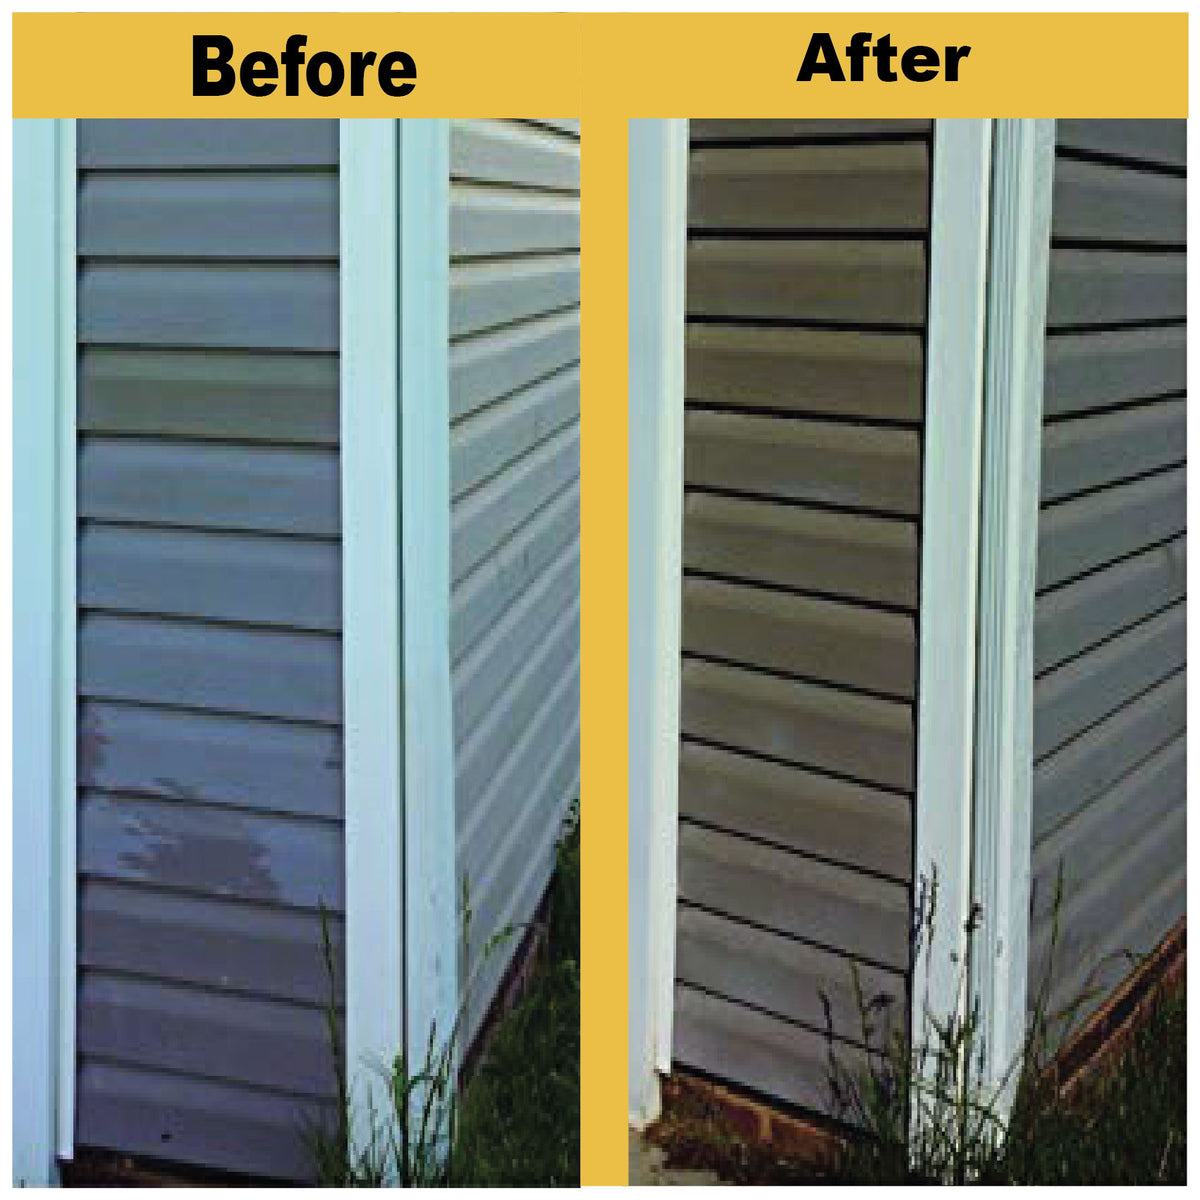 Vinyl Siding Restorer.  Actual Customer Image Showing Faded &amp; Ugly Vinyl Siding.  Right Side Is Restored To Original Color